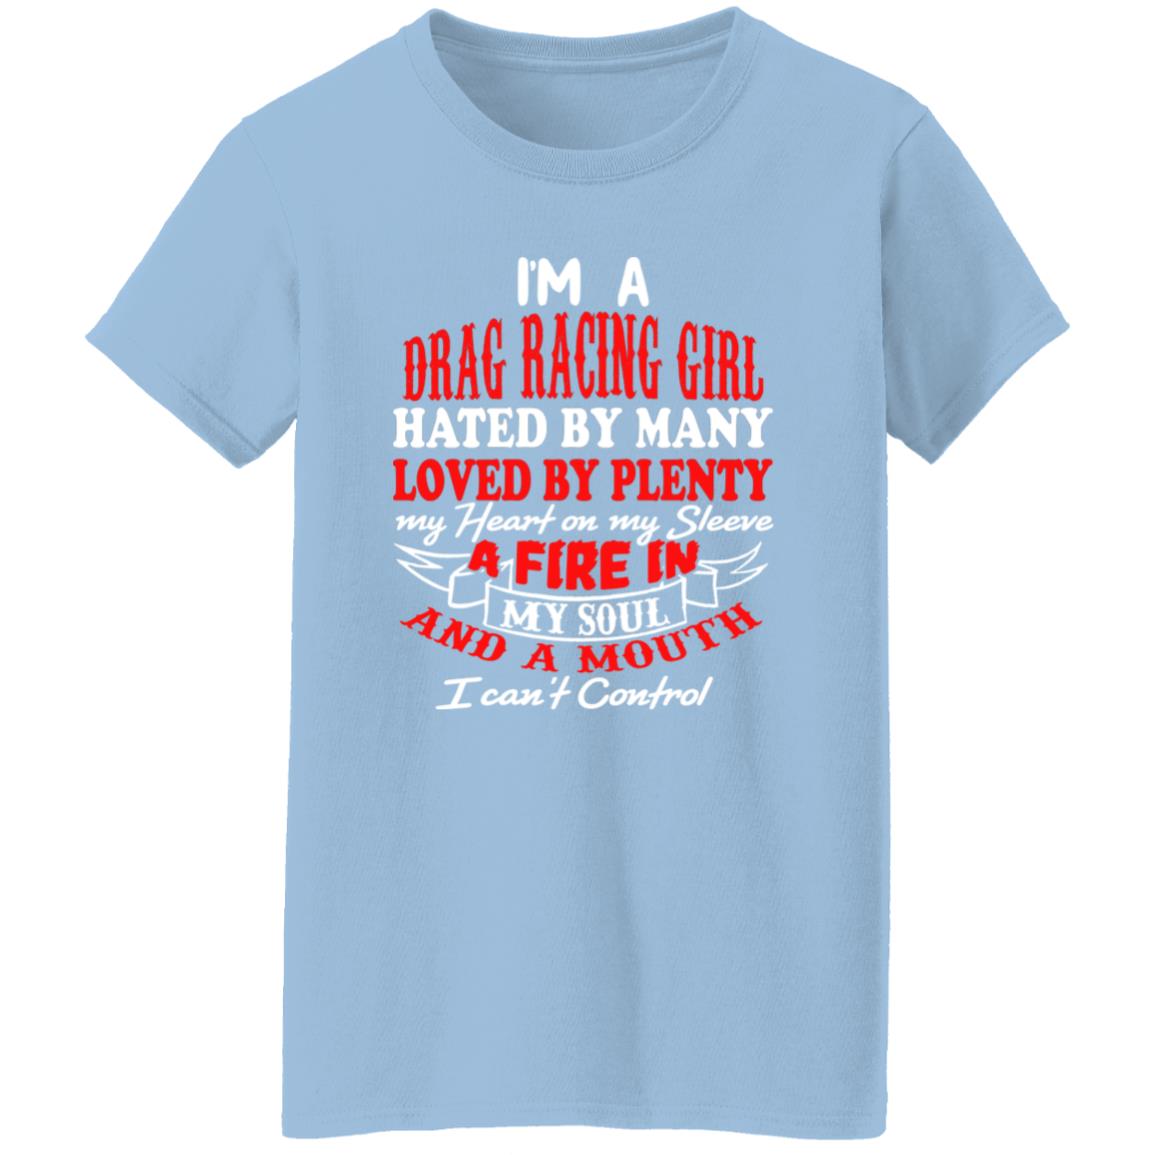 I'm A Drag Racing Girl Hated By Many Loved By Plenty Ladies' 5.3 oz. T-Shirt